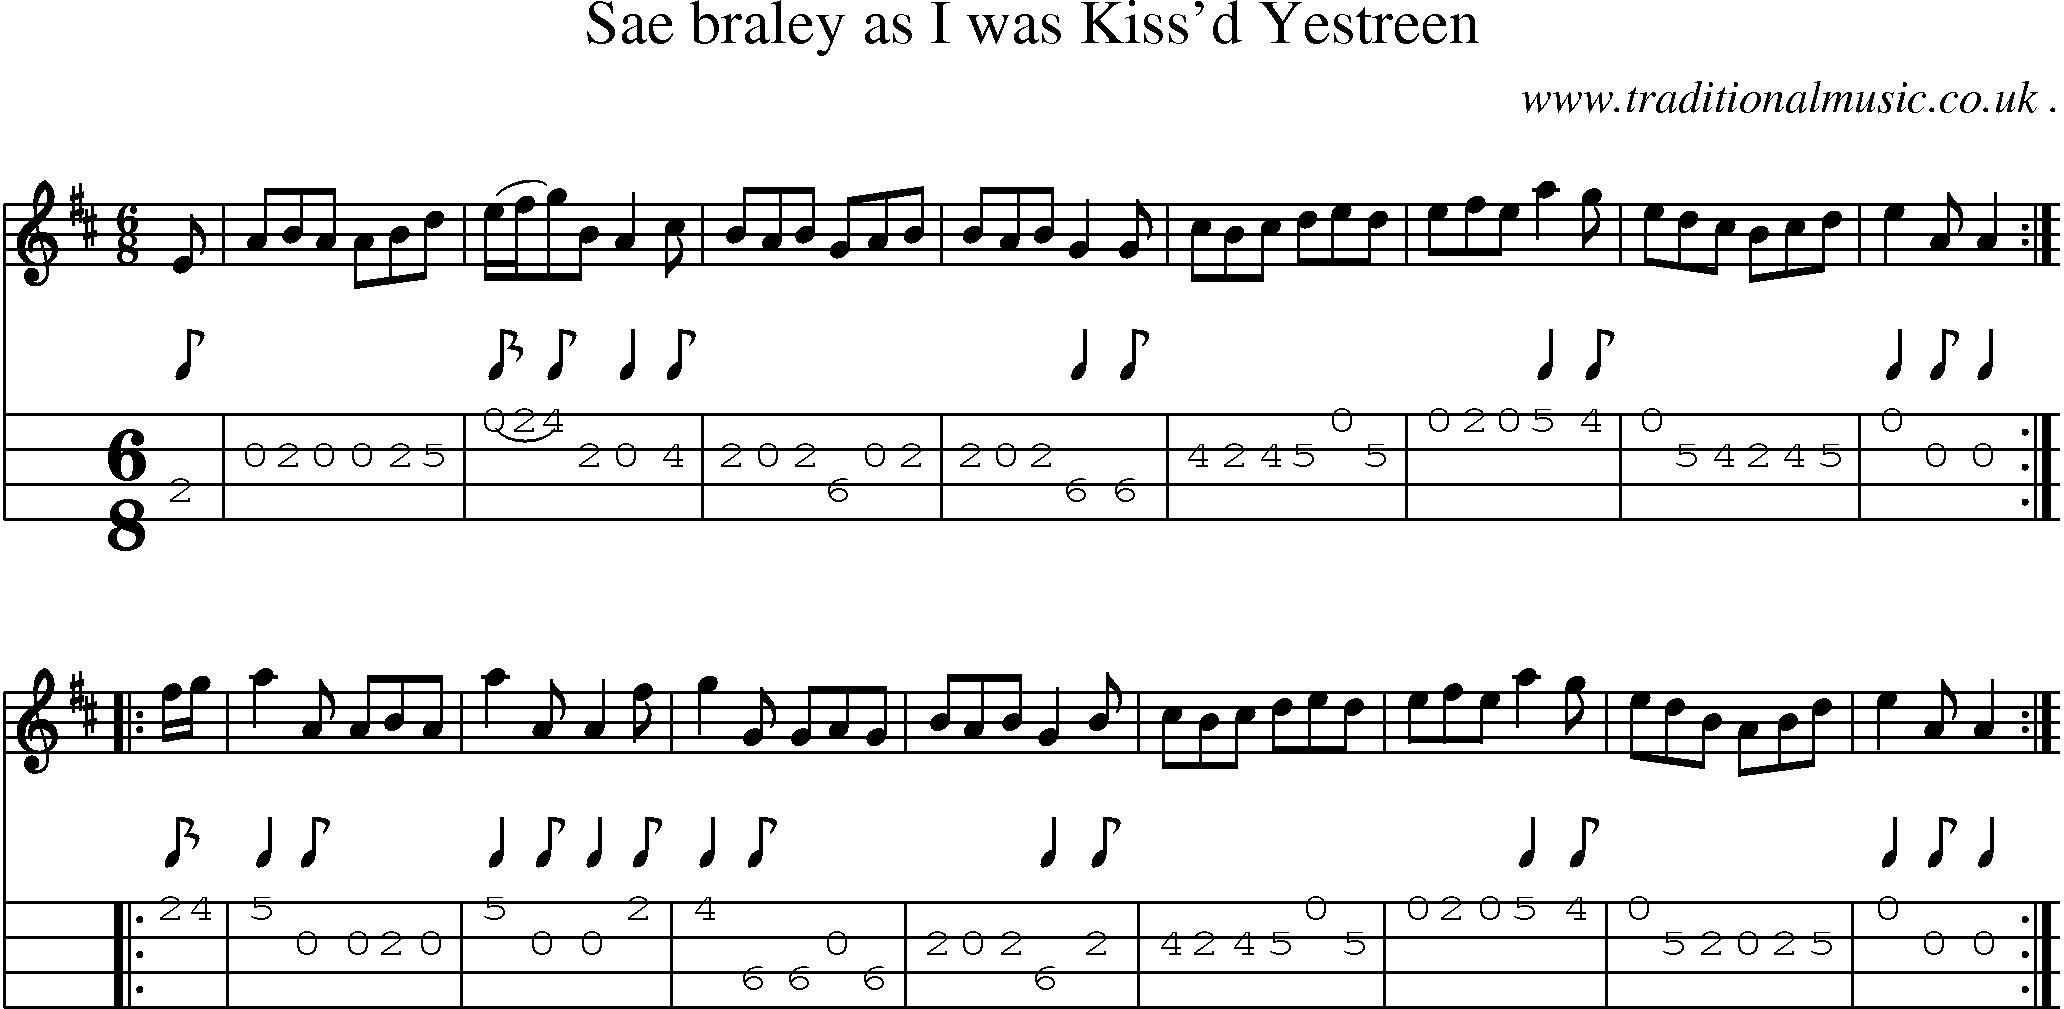 Sheet-Music and Mandolin Tabs for Sae Braley As I Was Kissd Yestreen